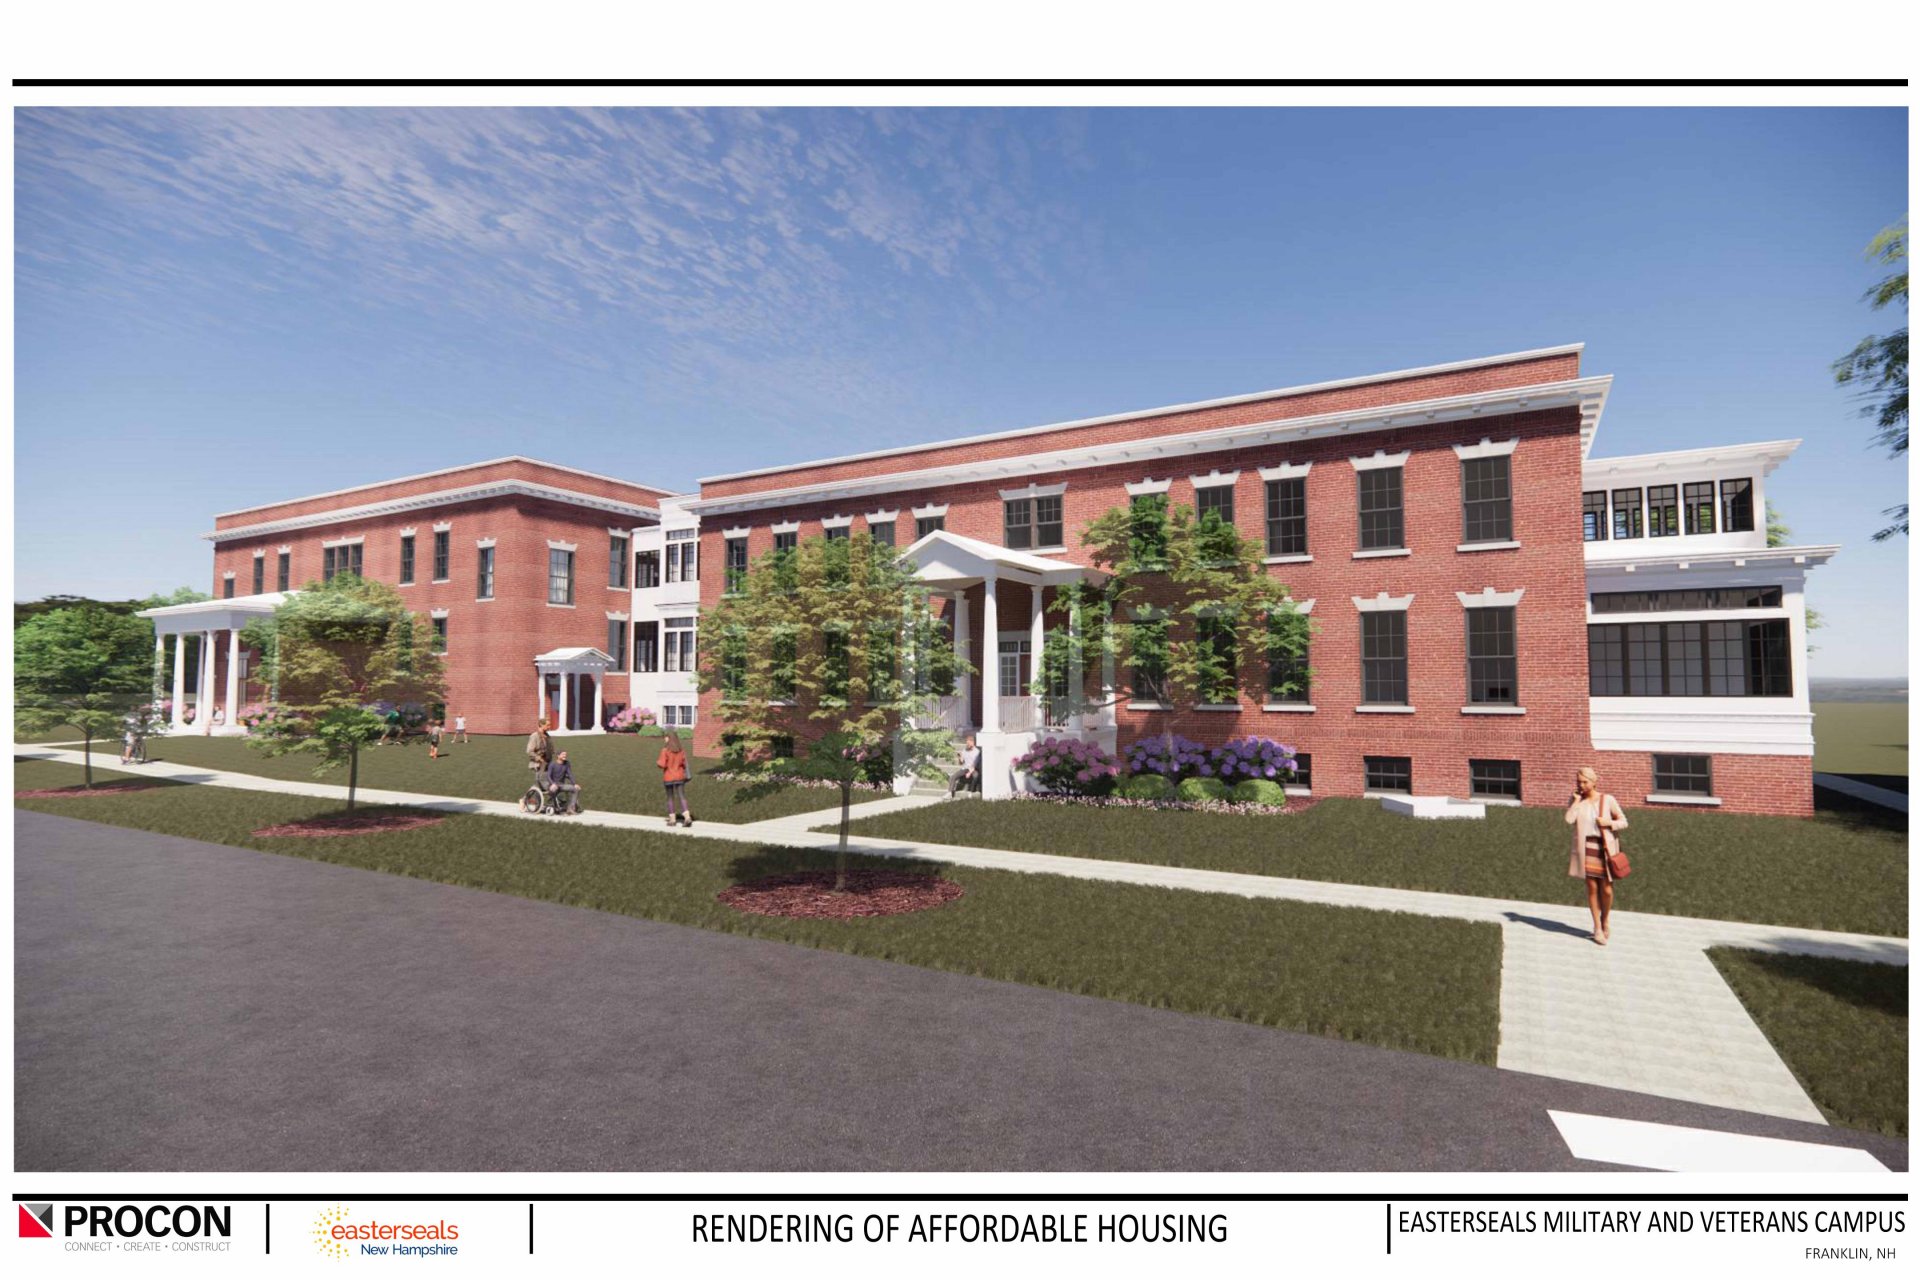 2023 0609 Easterseals Rendering Of Affordable Housing Procon